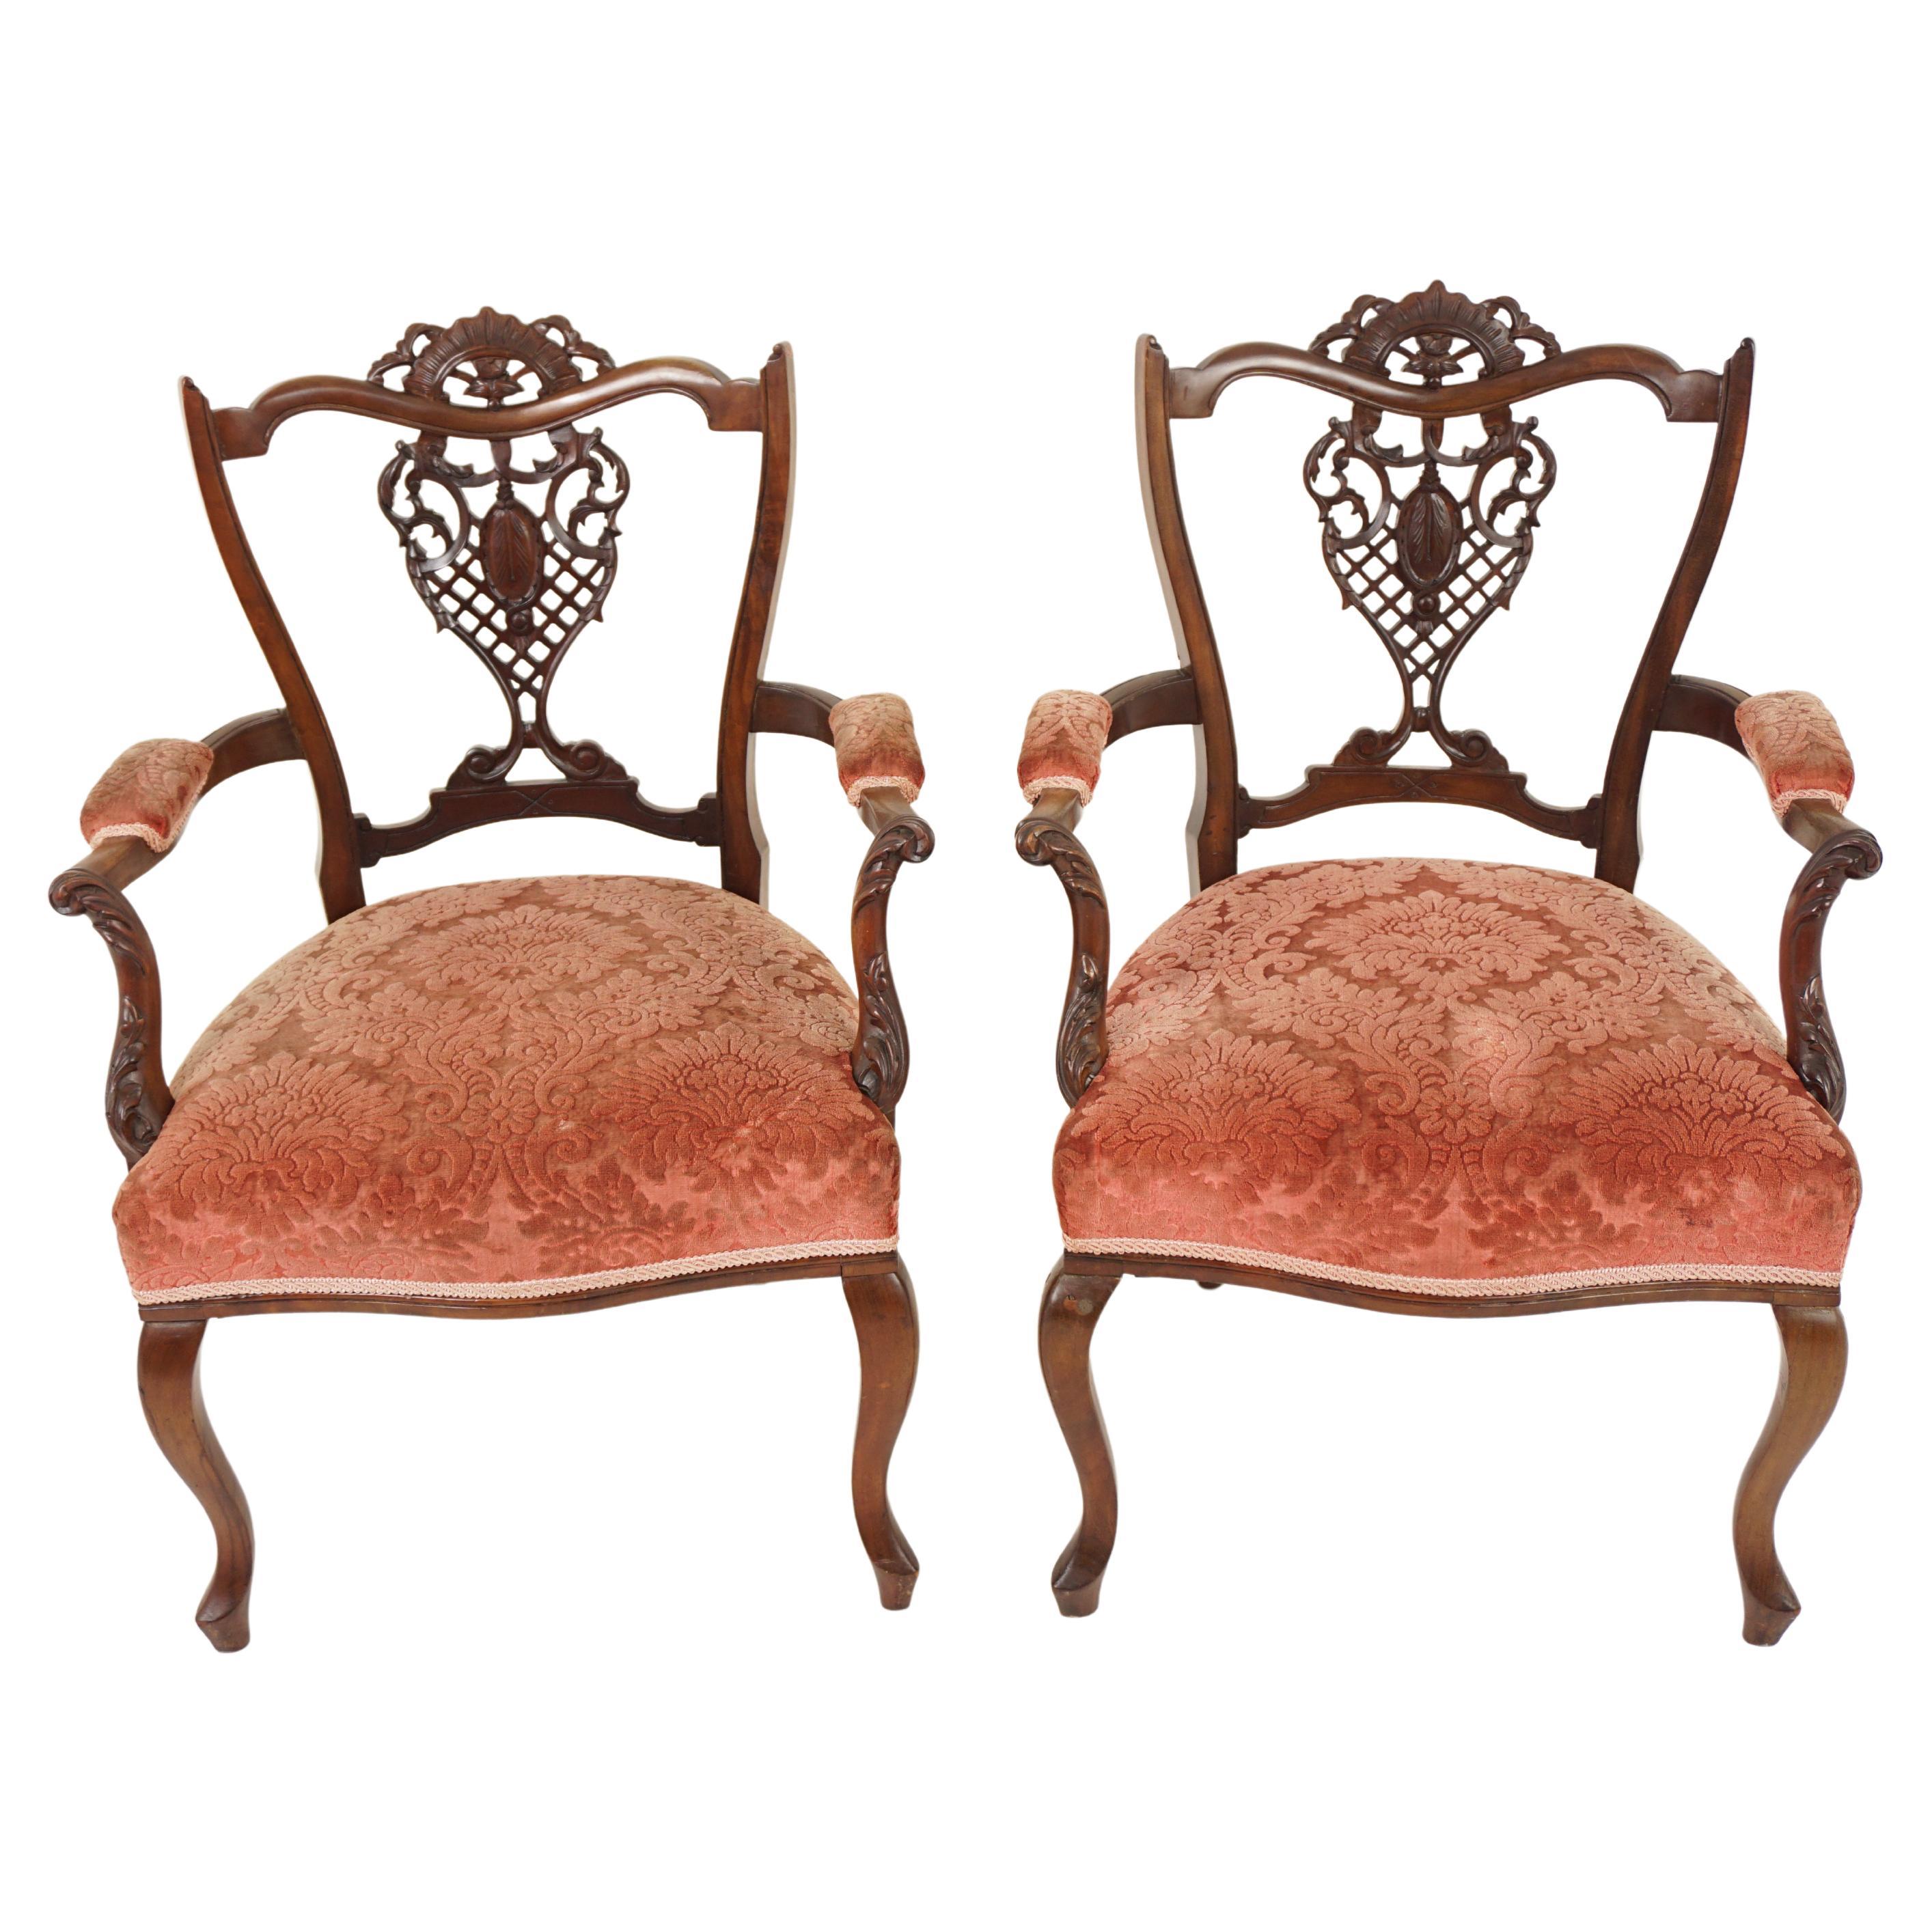 Antique Walnut Chairs, Pair of Edwardian Carved Arm Chairs, Scotland 1900, H983